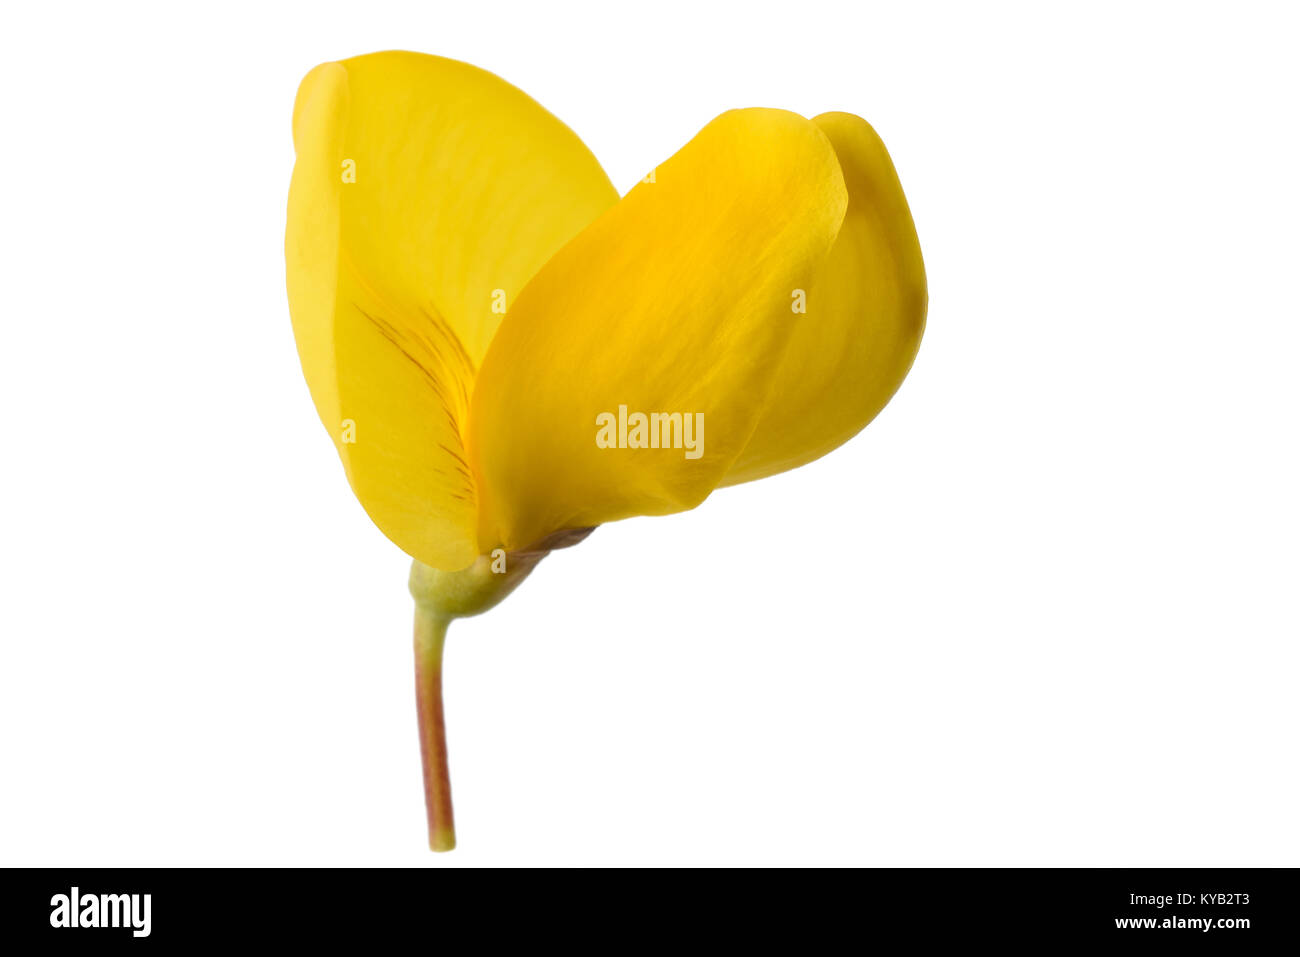 broom flower isolated on a white background Stock Photo